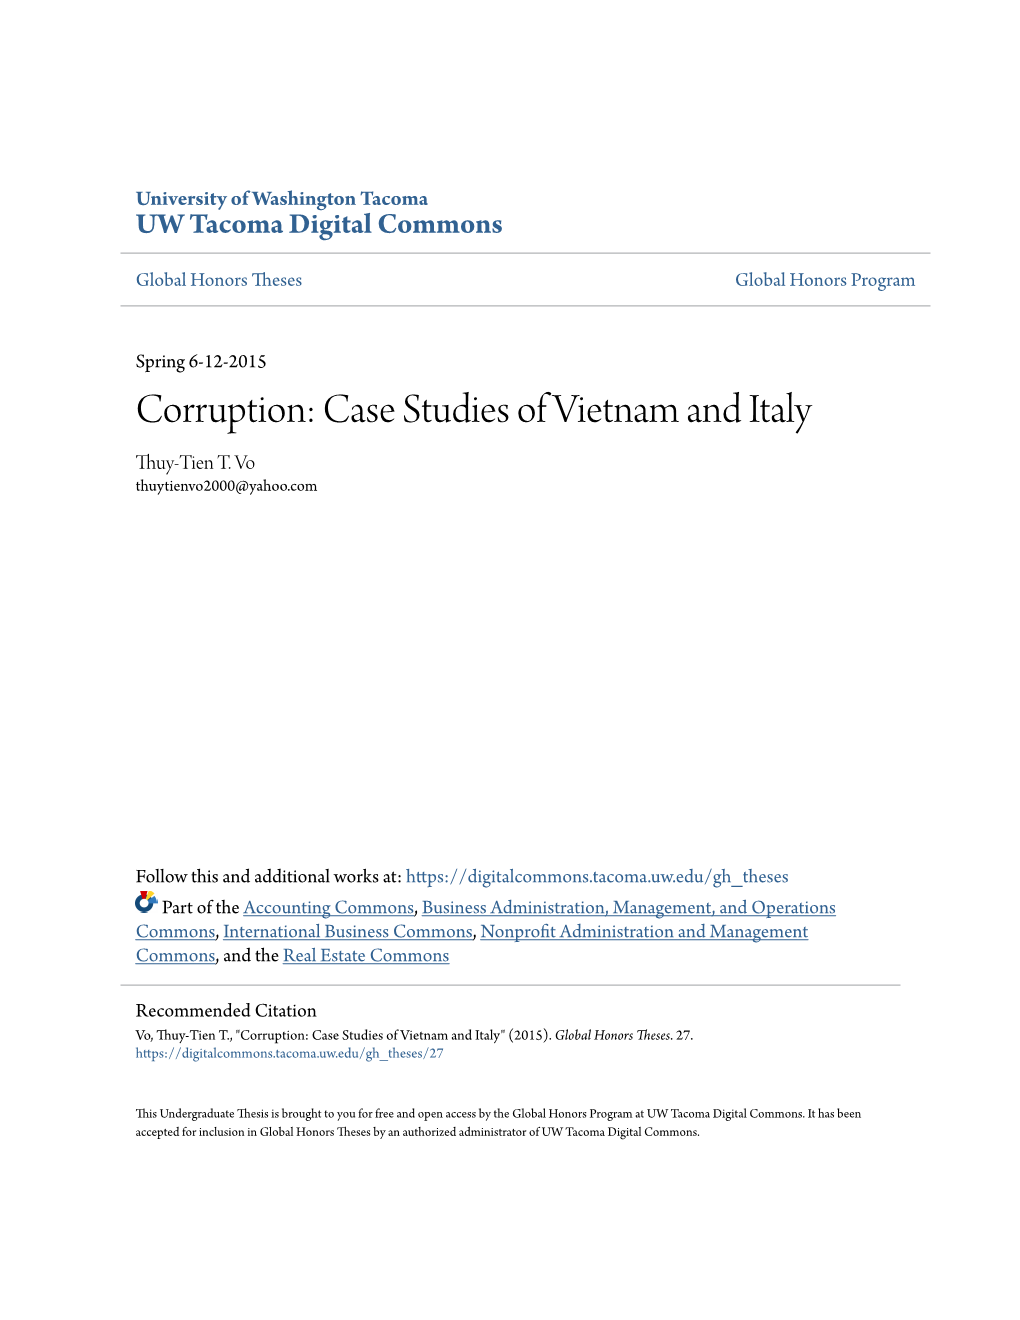 Corruption: Case Studies of Vietnam and Italy Thuy-Tien T